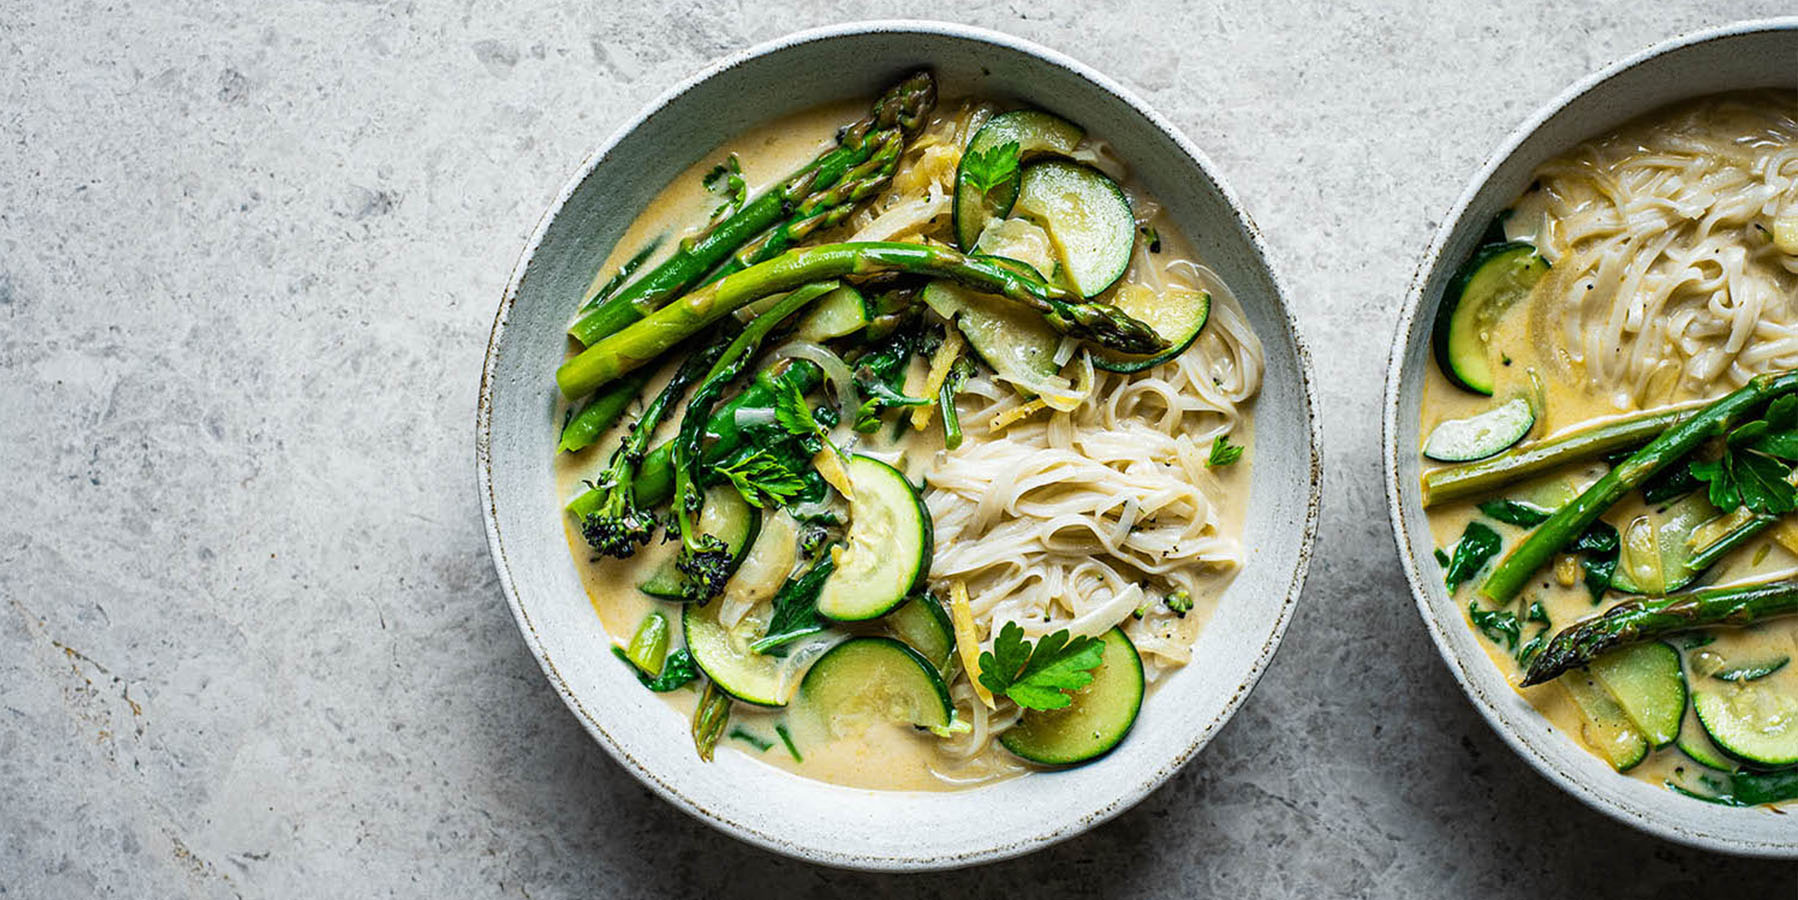 Rice noodles with green vegetables in bowls.